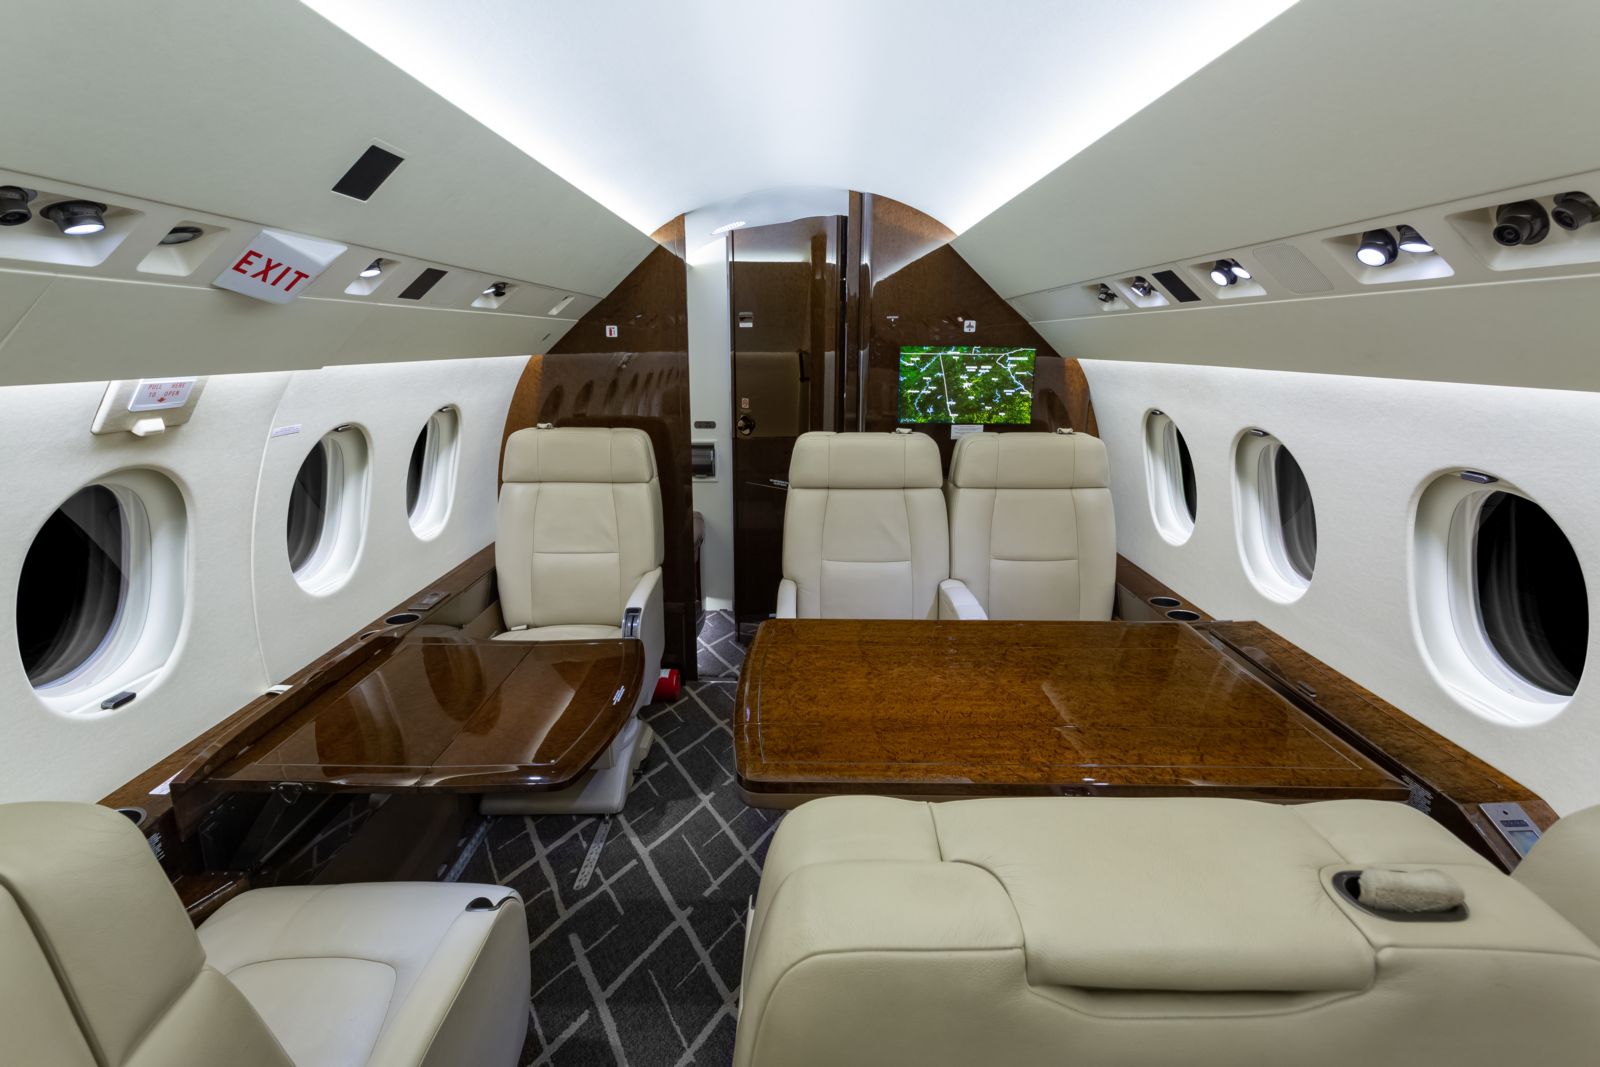 Dassault Falcon 2000LX  S/N 250 for sale | gallery image: /userfiles/files/bfp_9020.jpg